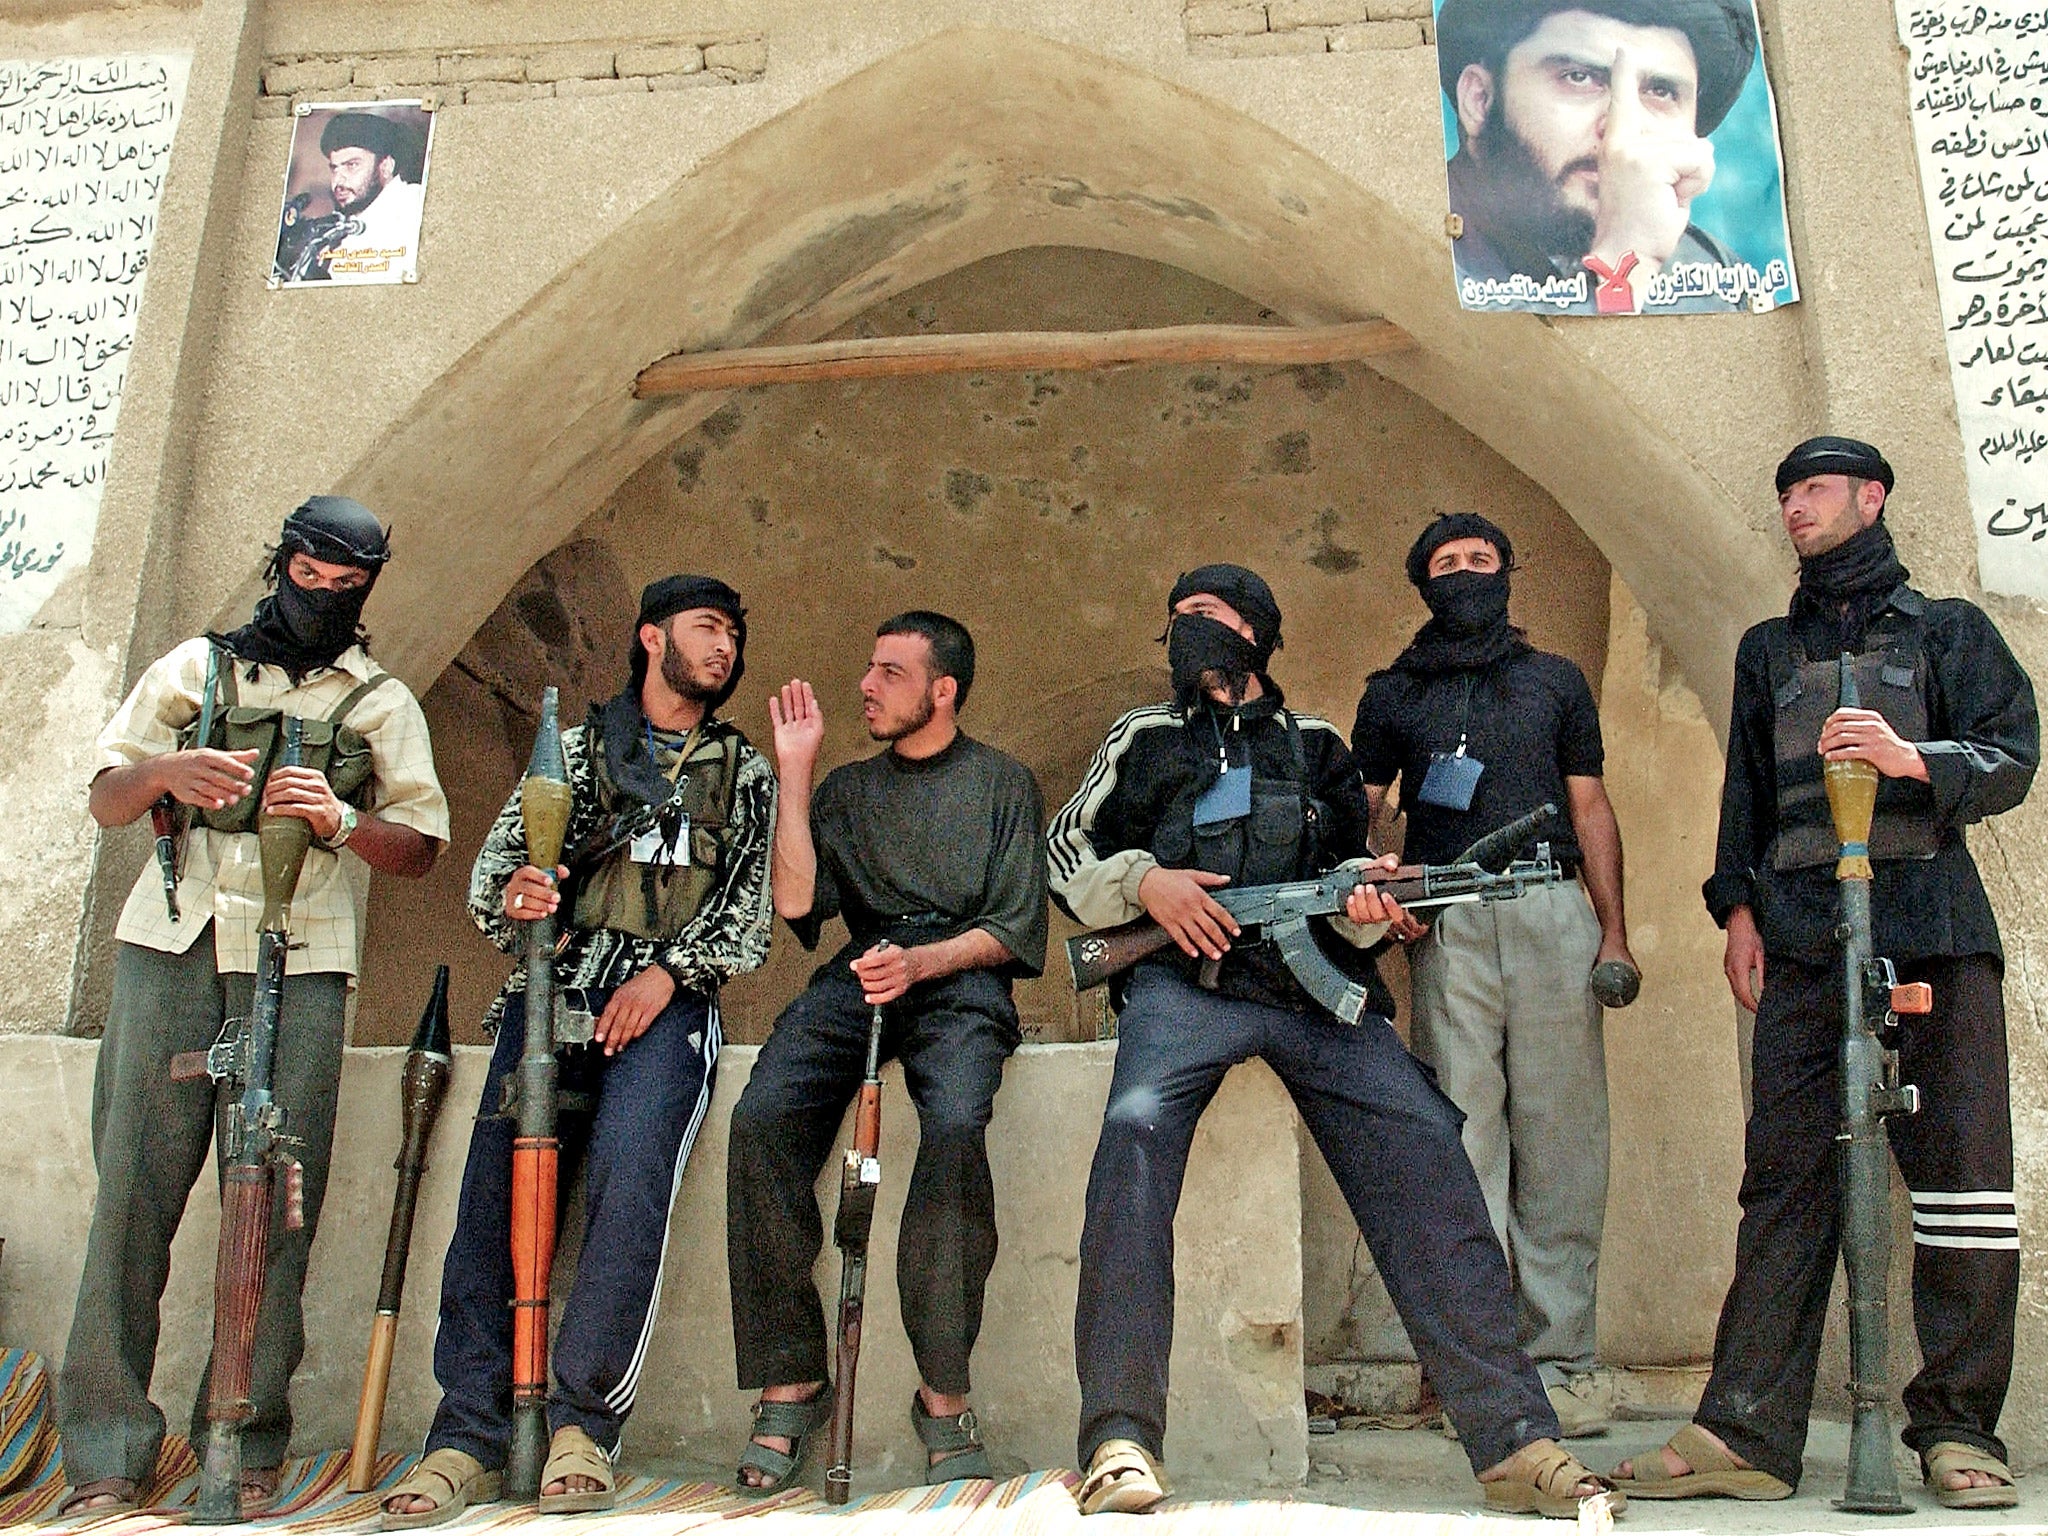 Members of the Mehdi Army outside the cemetery in Najaf in 2004